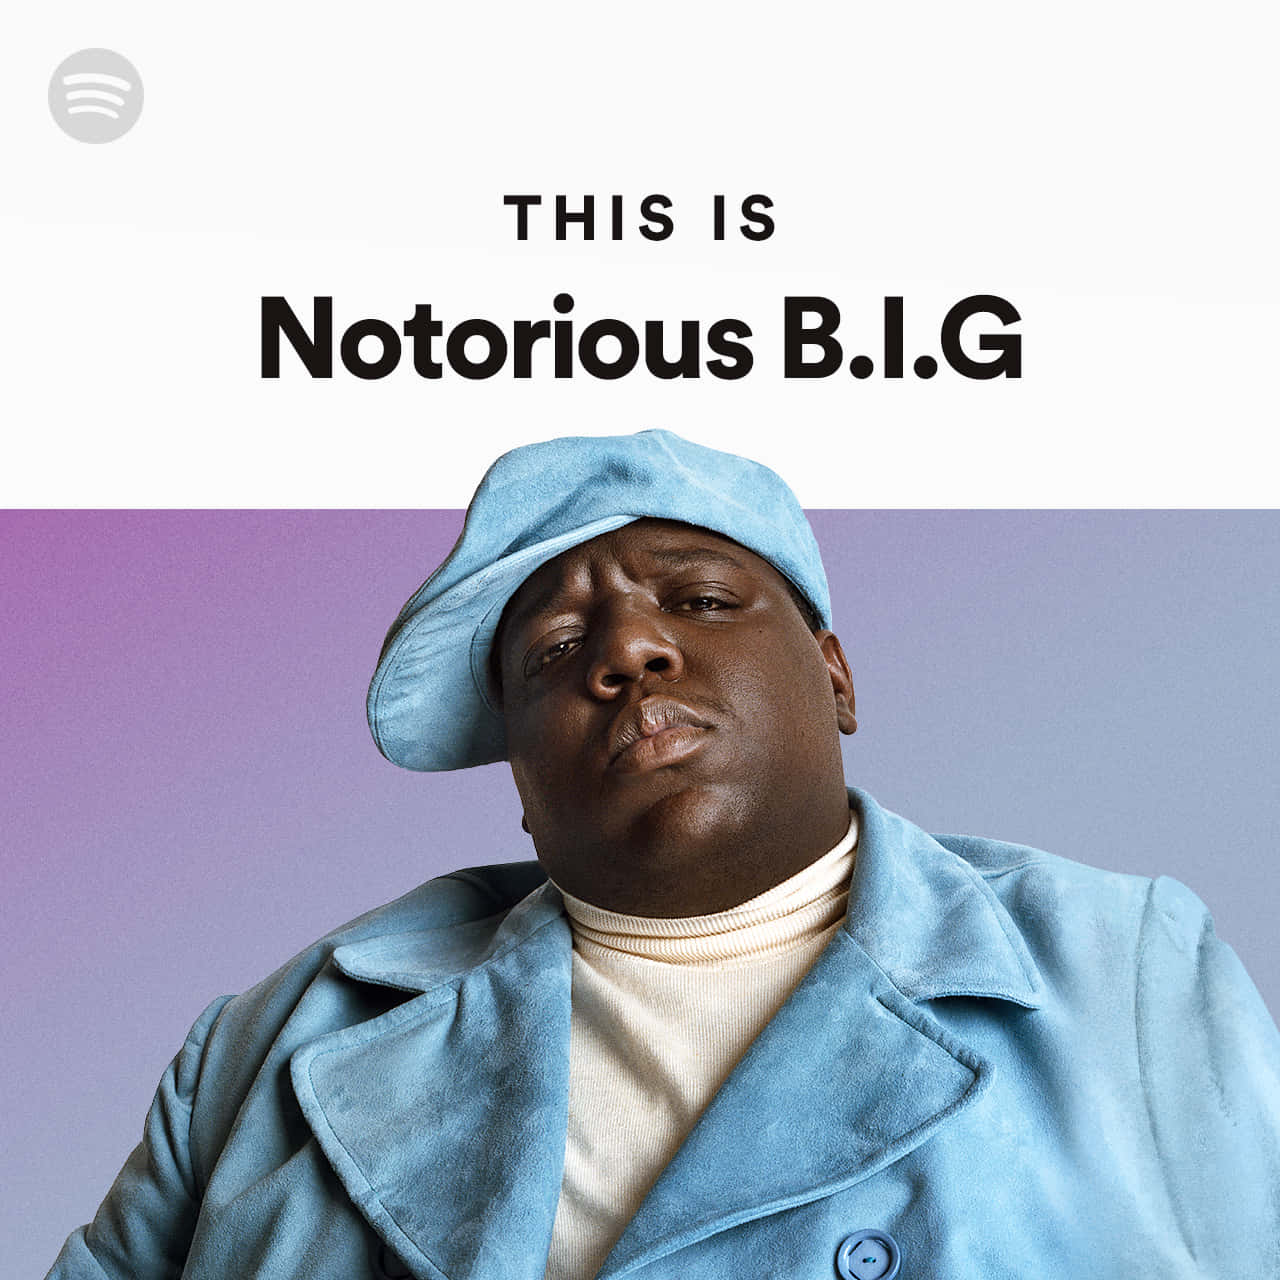 Notorious B.I.G Wallpapers - Top 30 Best Notorious B.I.G Wallpapers Download